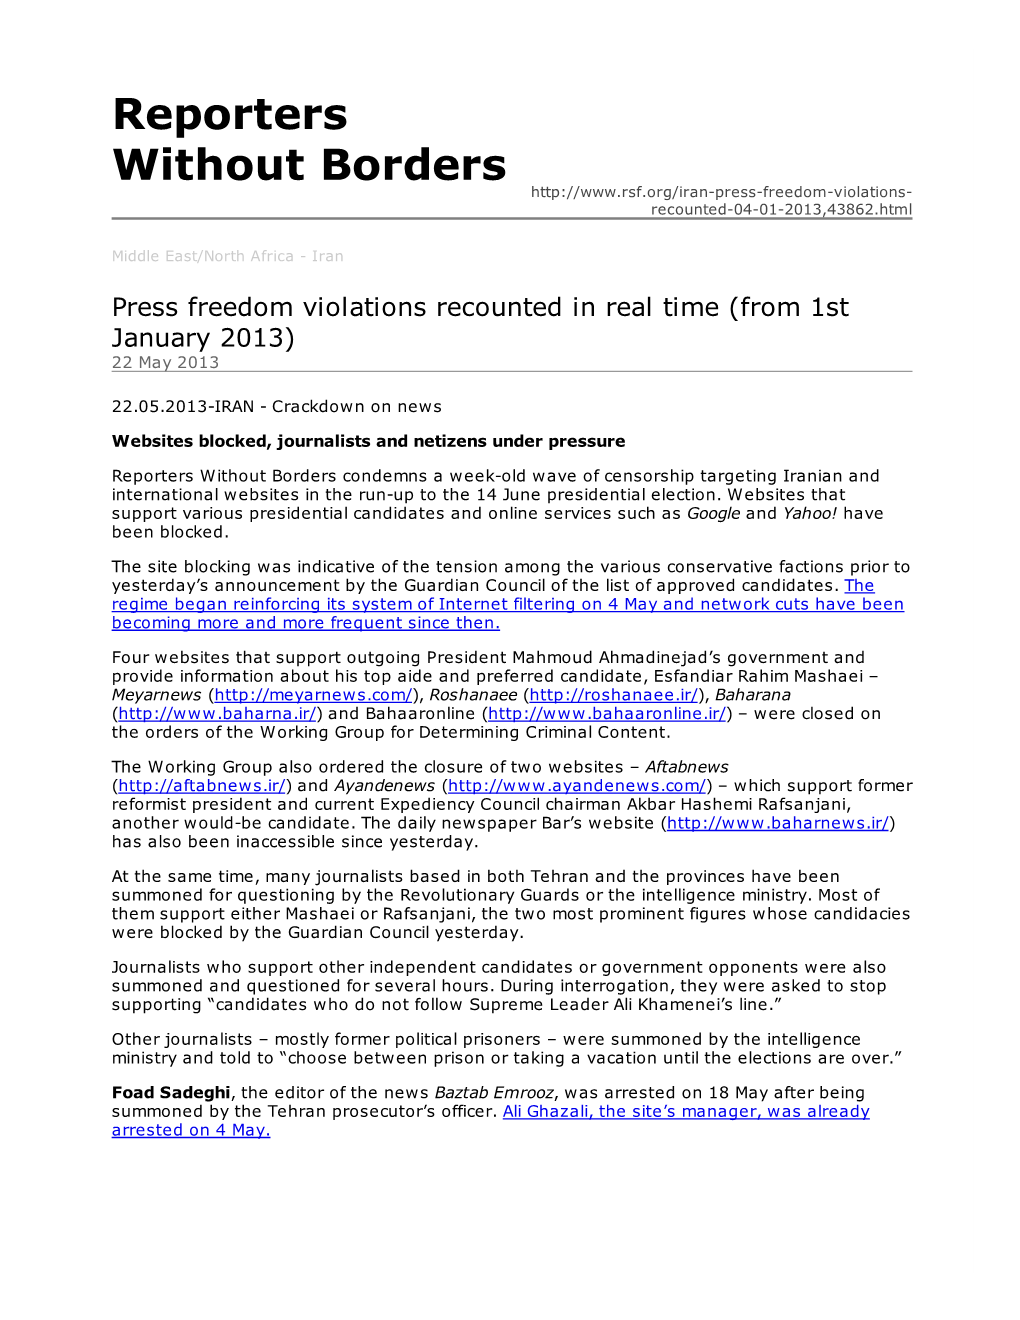 Reporters Without Borders Recounted-04-01-2013,43862.Html